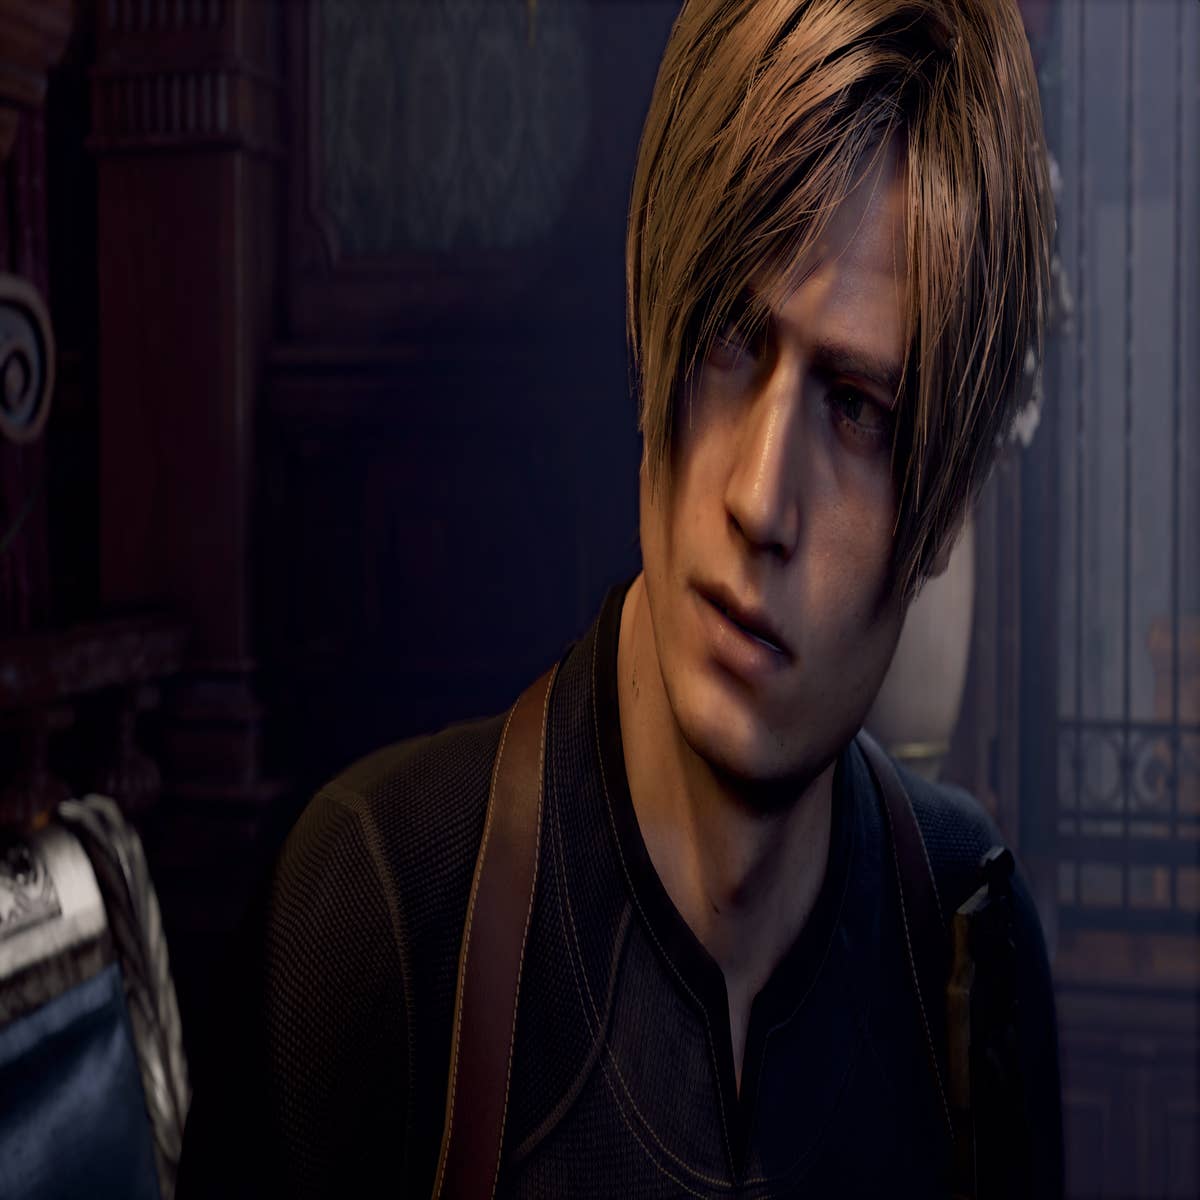 Resident Evil 4 remake release date, trailers, and gameplay